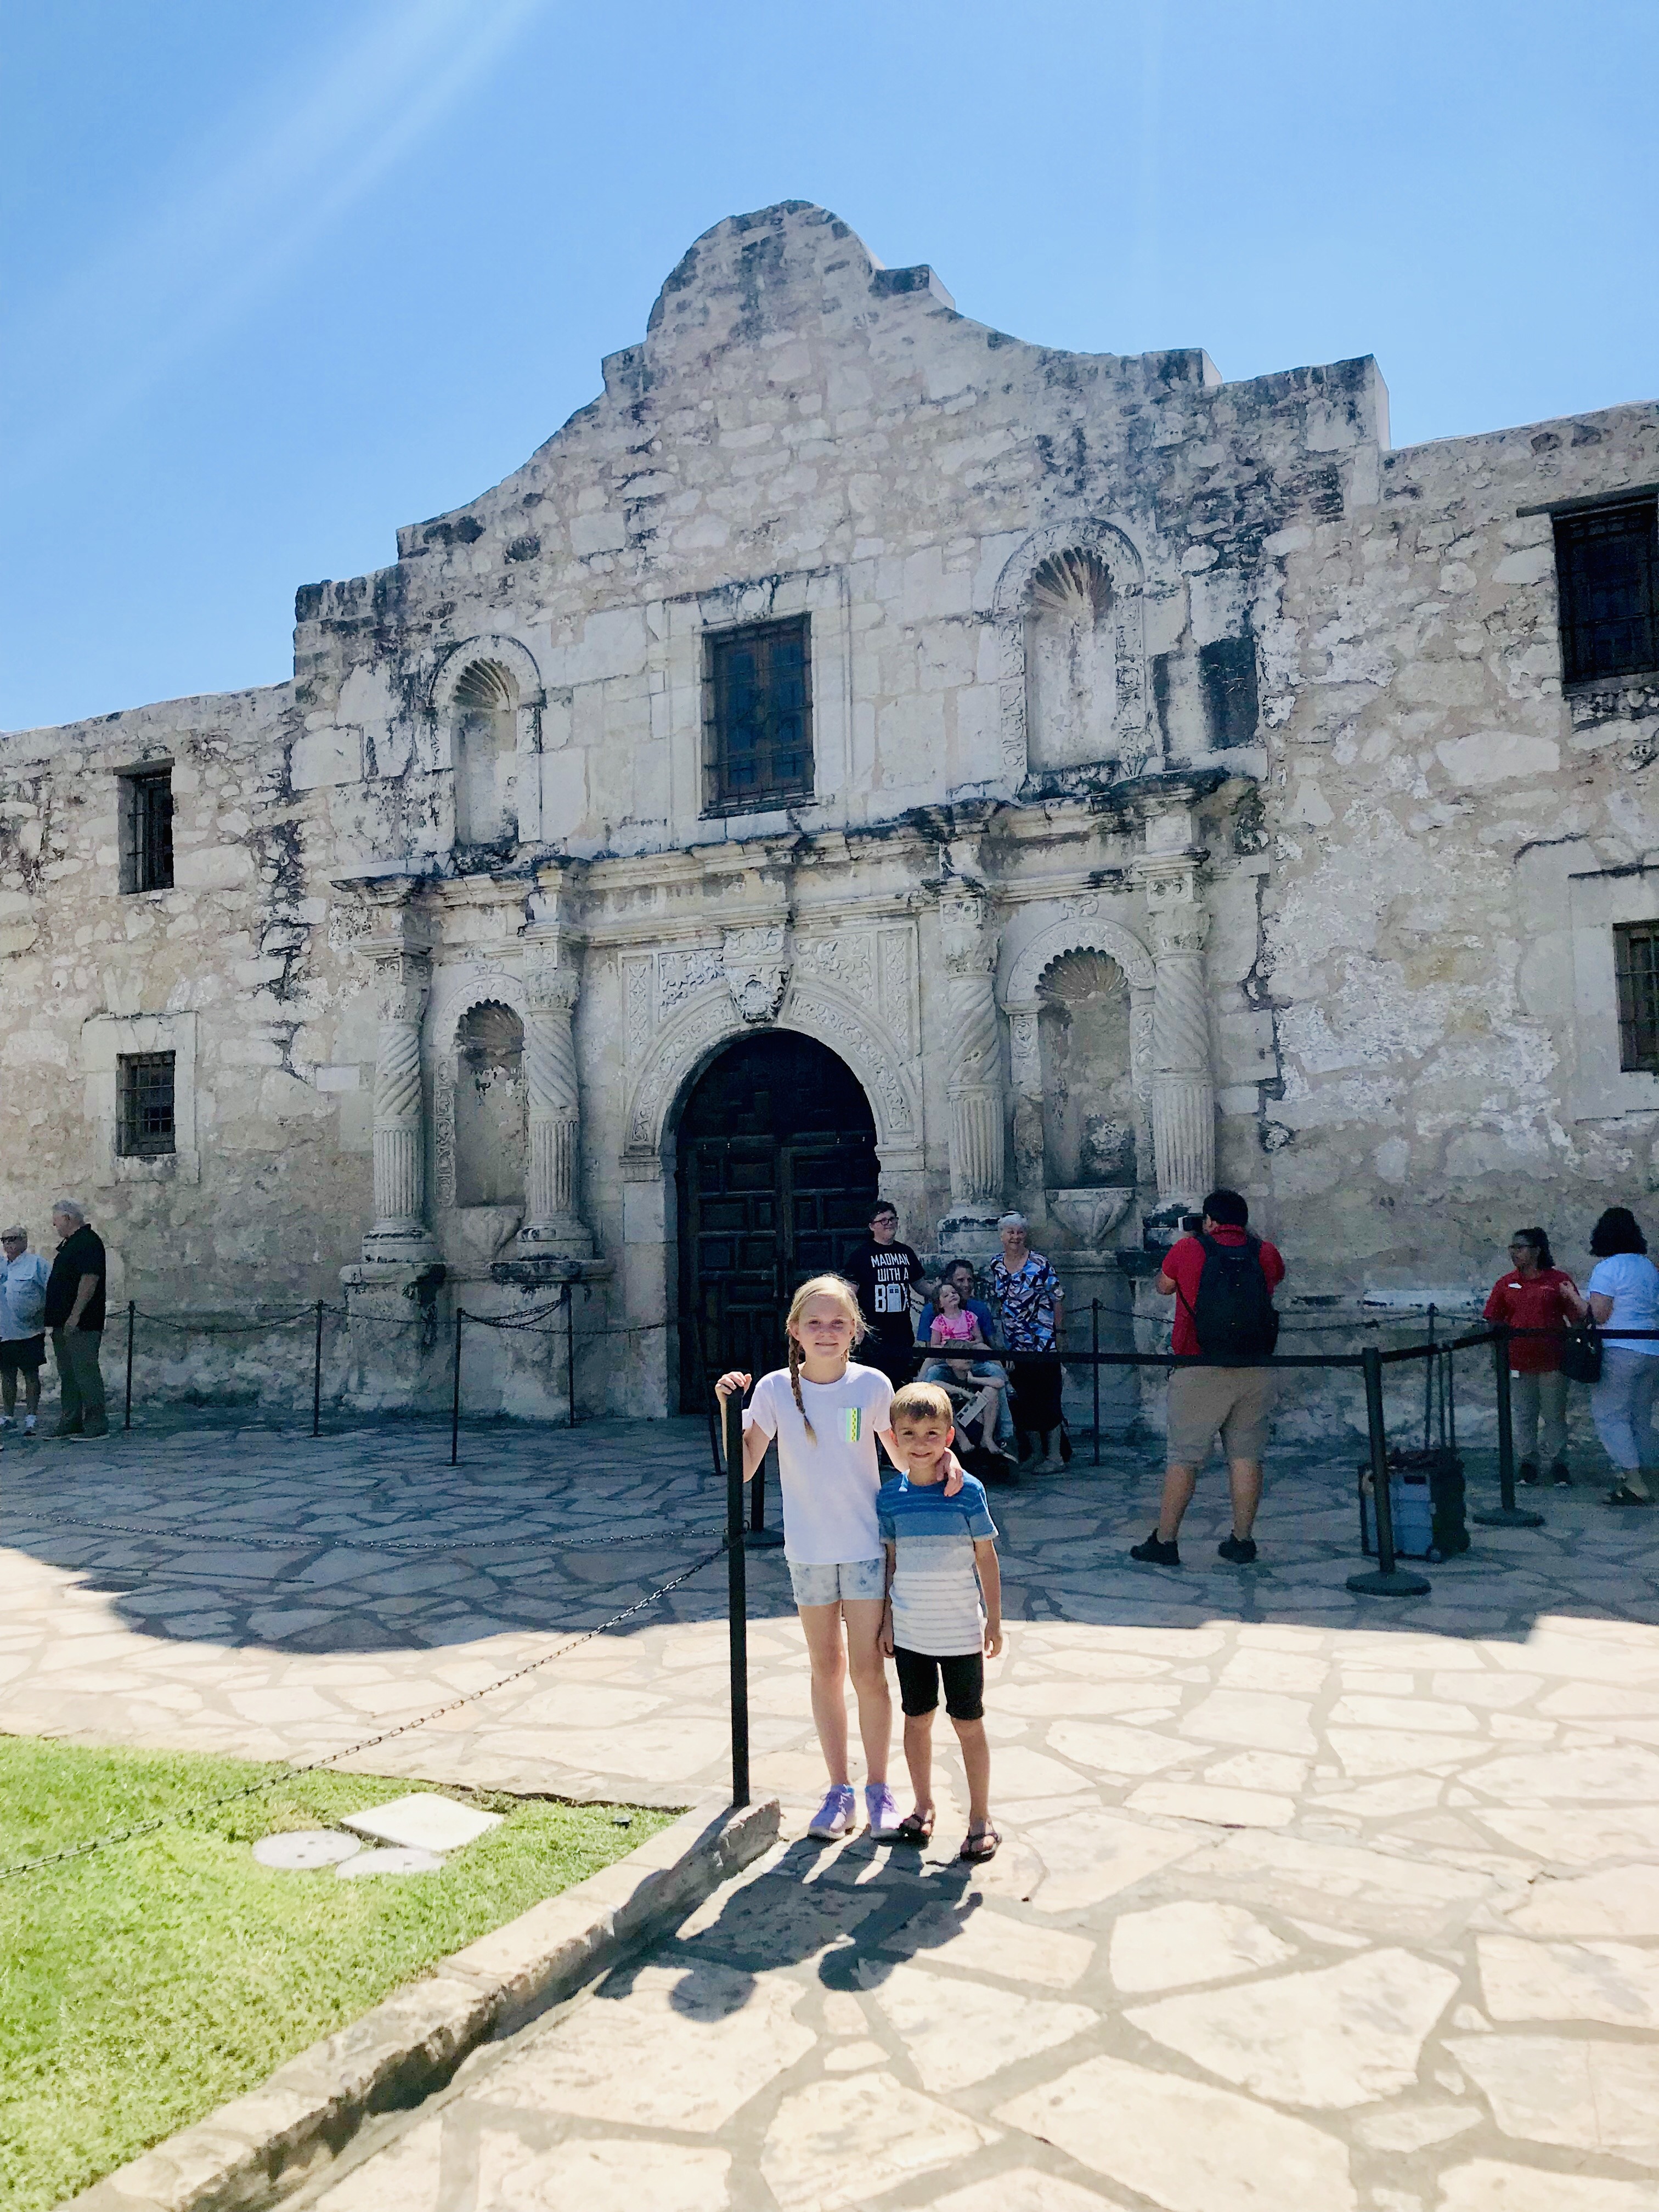 In front of the Alamo